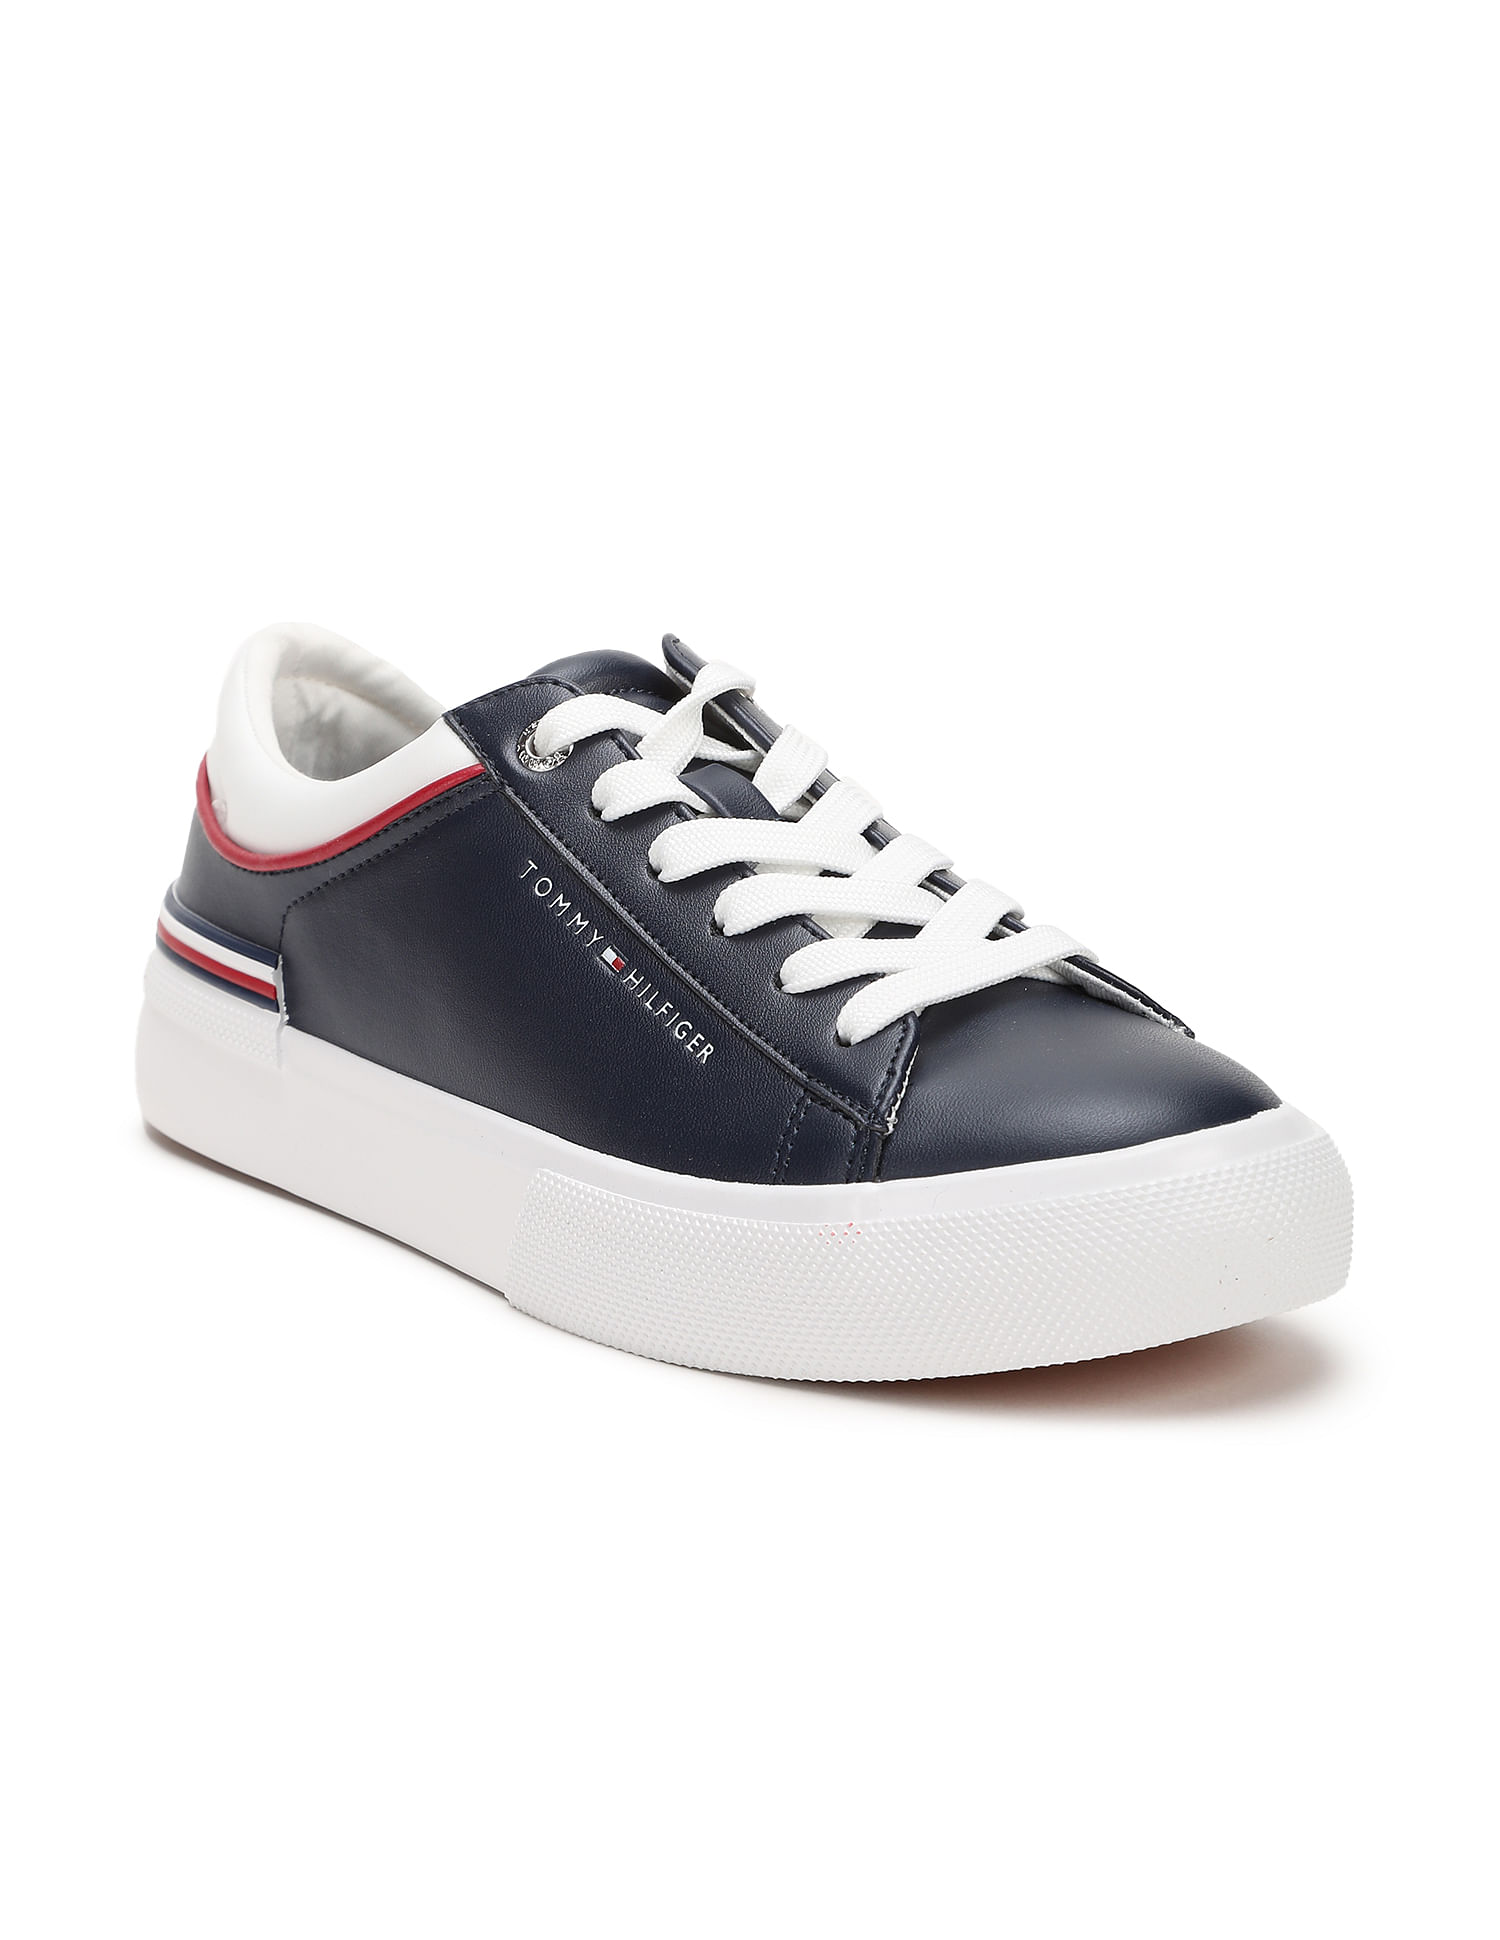 Buy Tommy Hilfiger Women's Laddin Sneaker at Ubuy India